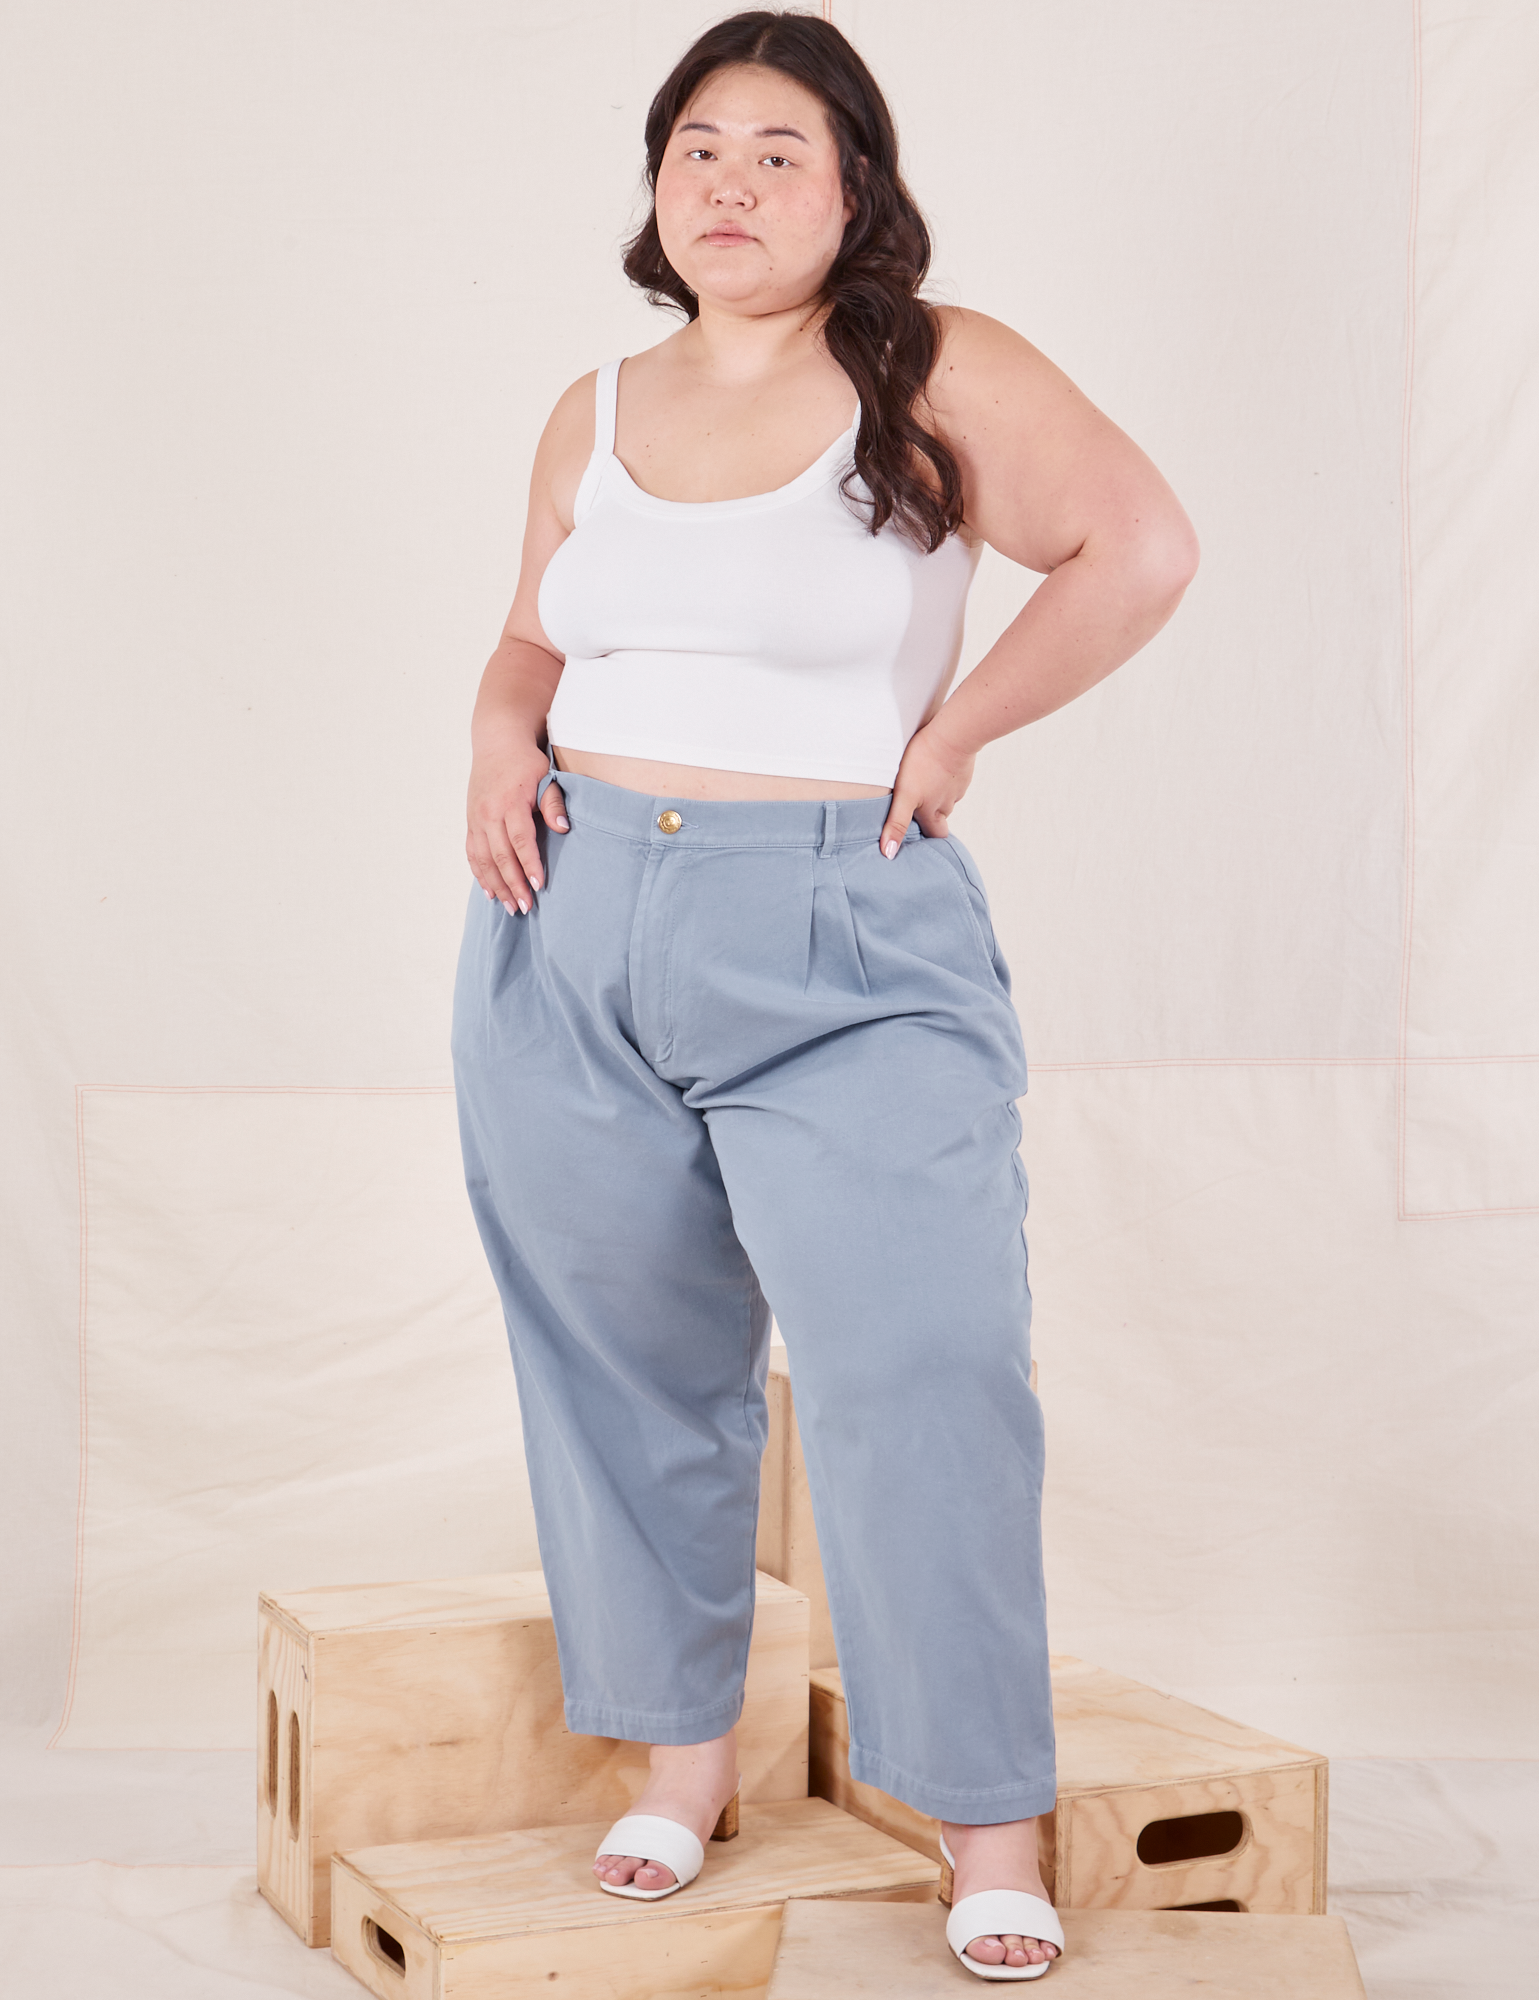 Ashley is 5'7" and wearing 1XL Petite Organic Trousers in Periwinkle paired with Cropped Cami in vintage tee off-white